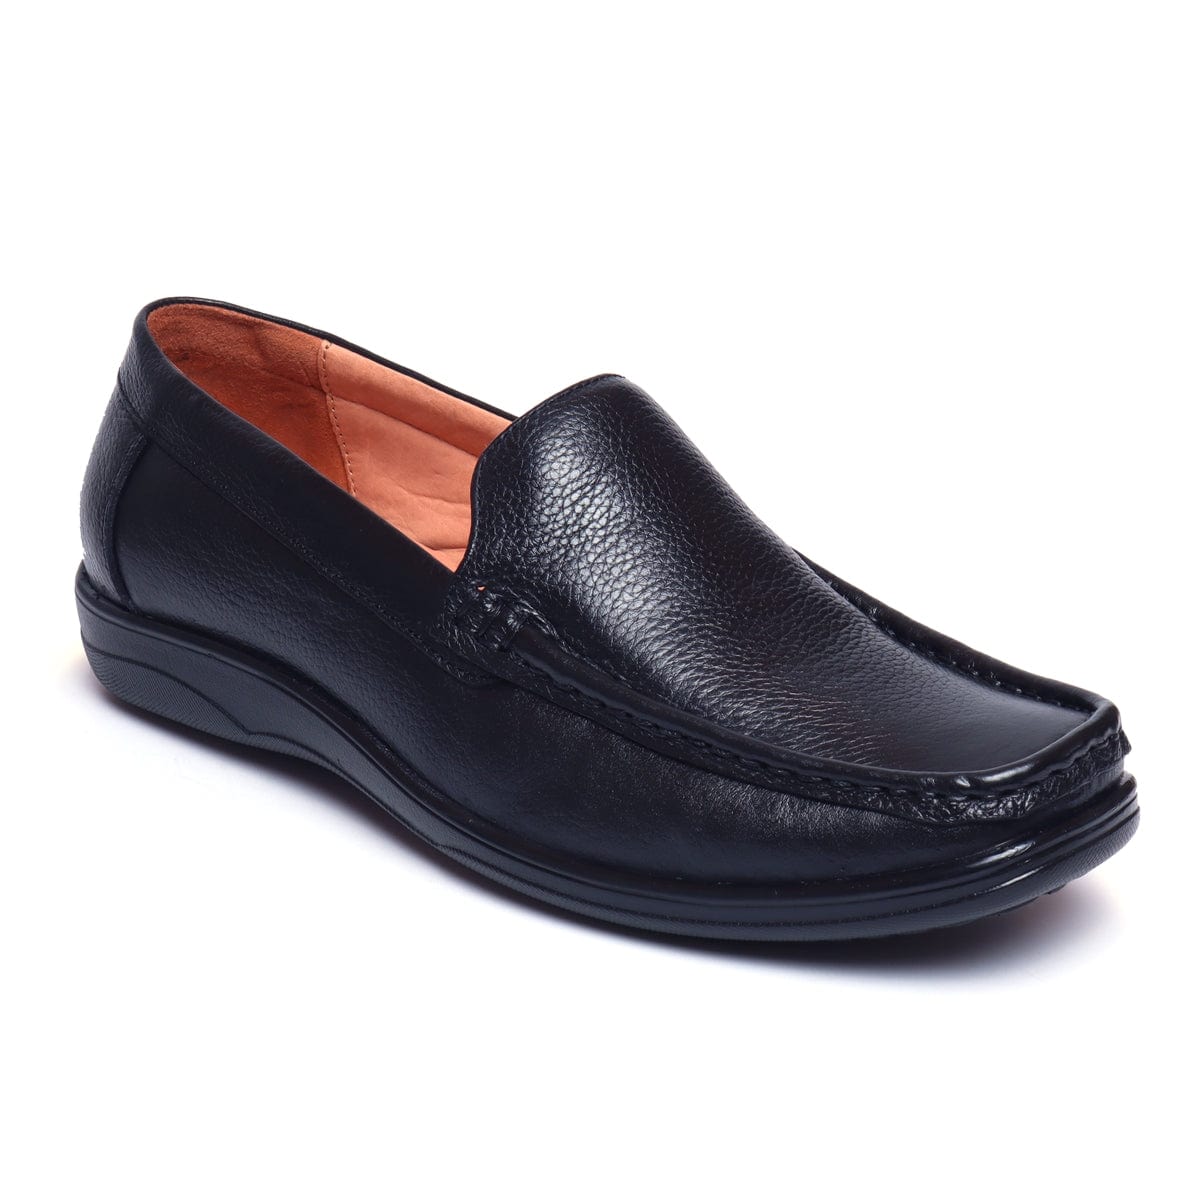 Zoom Shoes™ Leather Formal Shoes for Men D-121 | Zoom Shoes India | Reviews  on